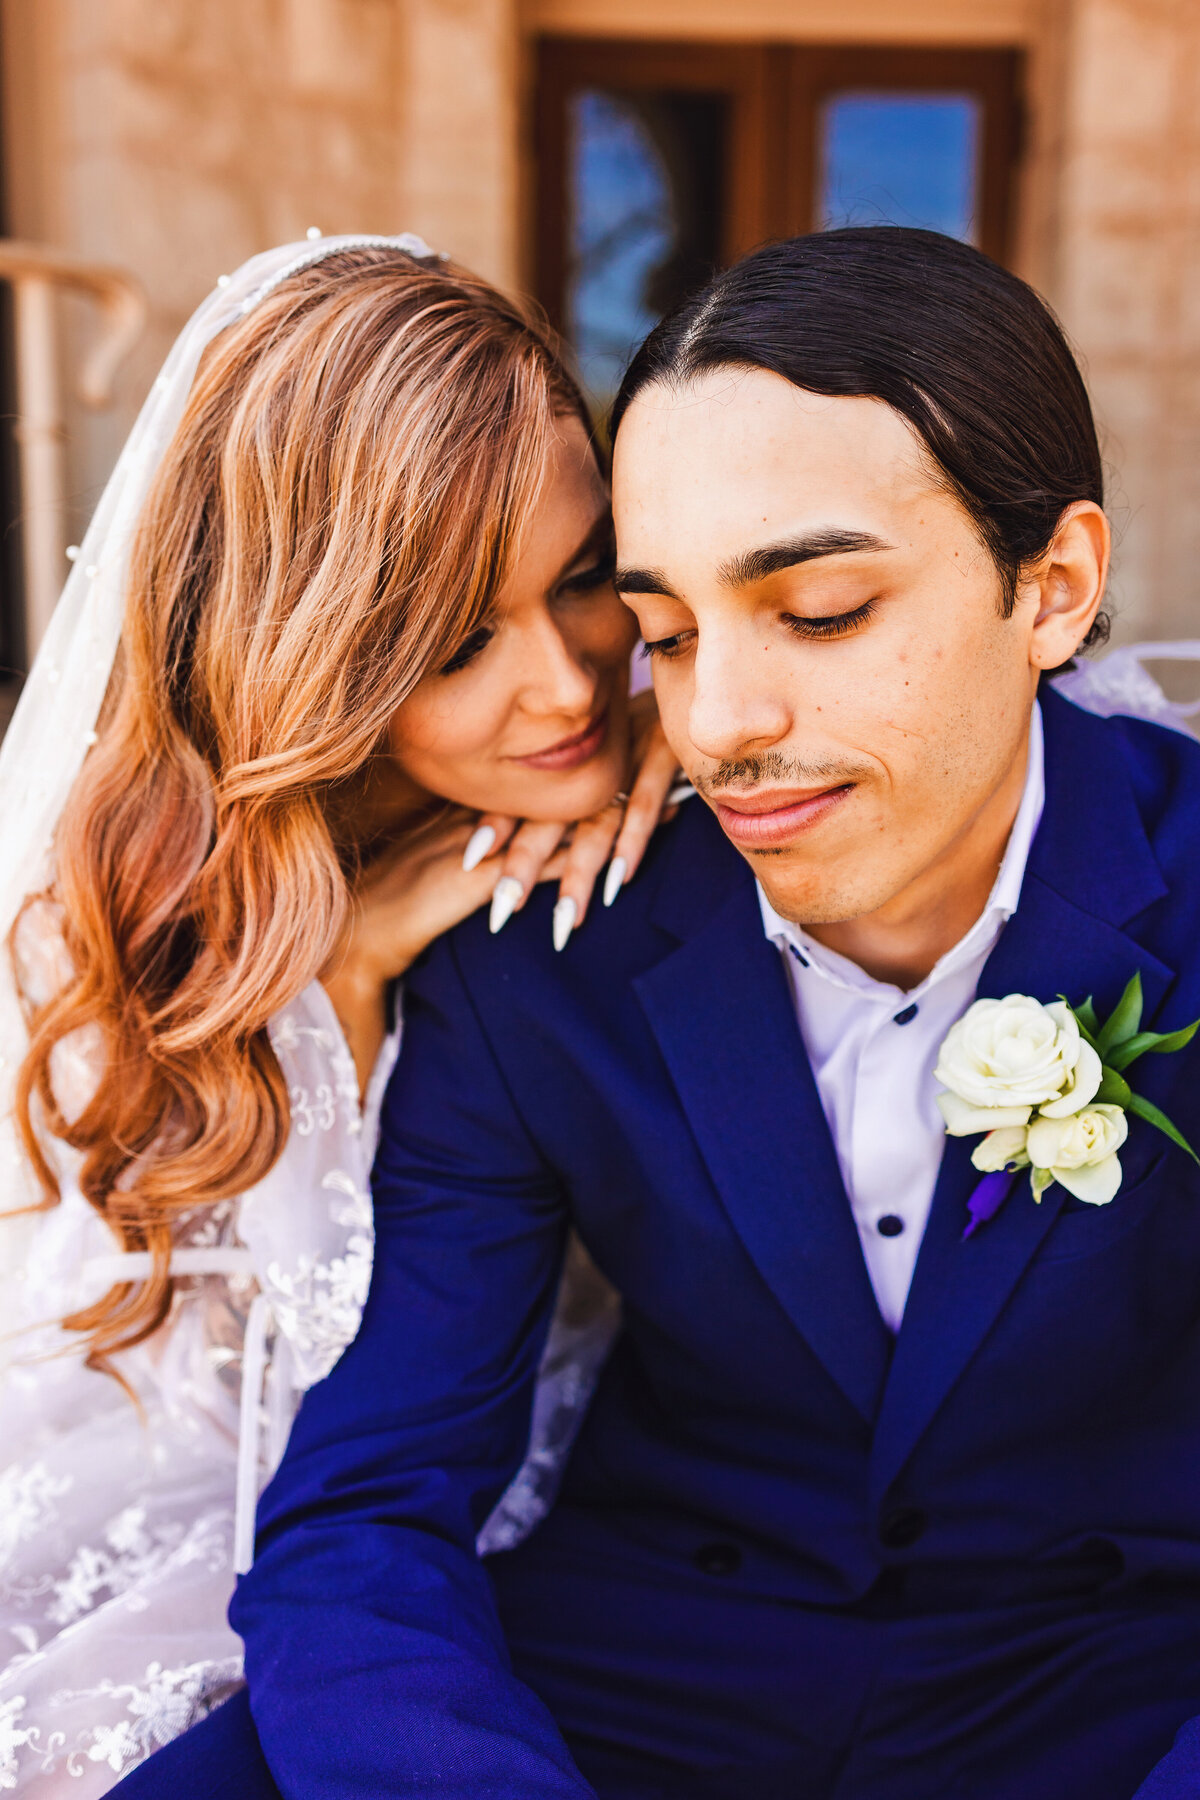 Embrace the adventure that awaits with a downtown courthouse elopement in Texas. Bursting with colors, love, and the freedom to create your unique story together.